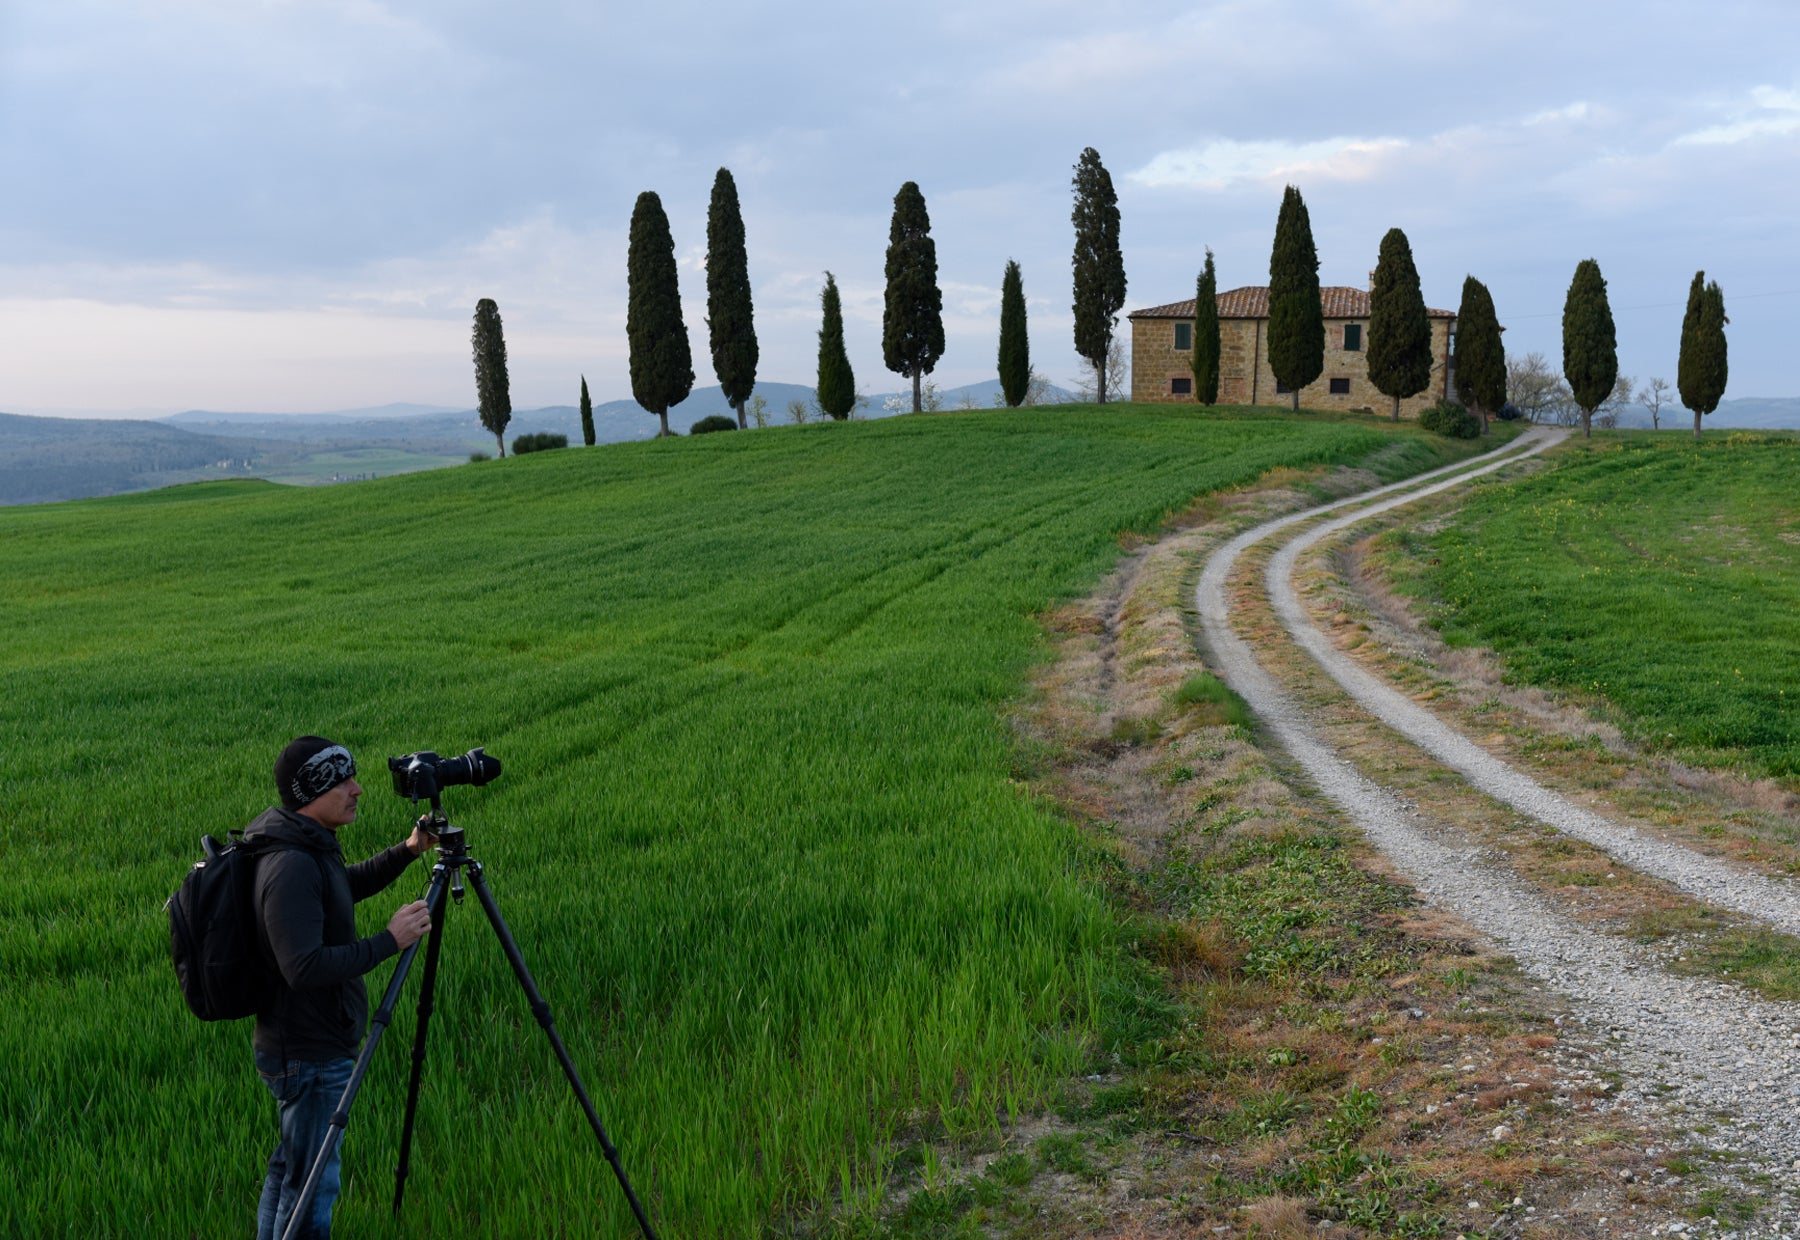 Portrait of Peter Lik with his tripod at the grassy entrance of a tree-lined chalet in Tuscany, Italy